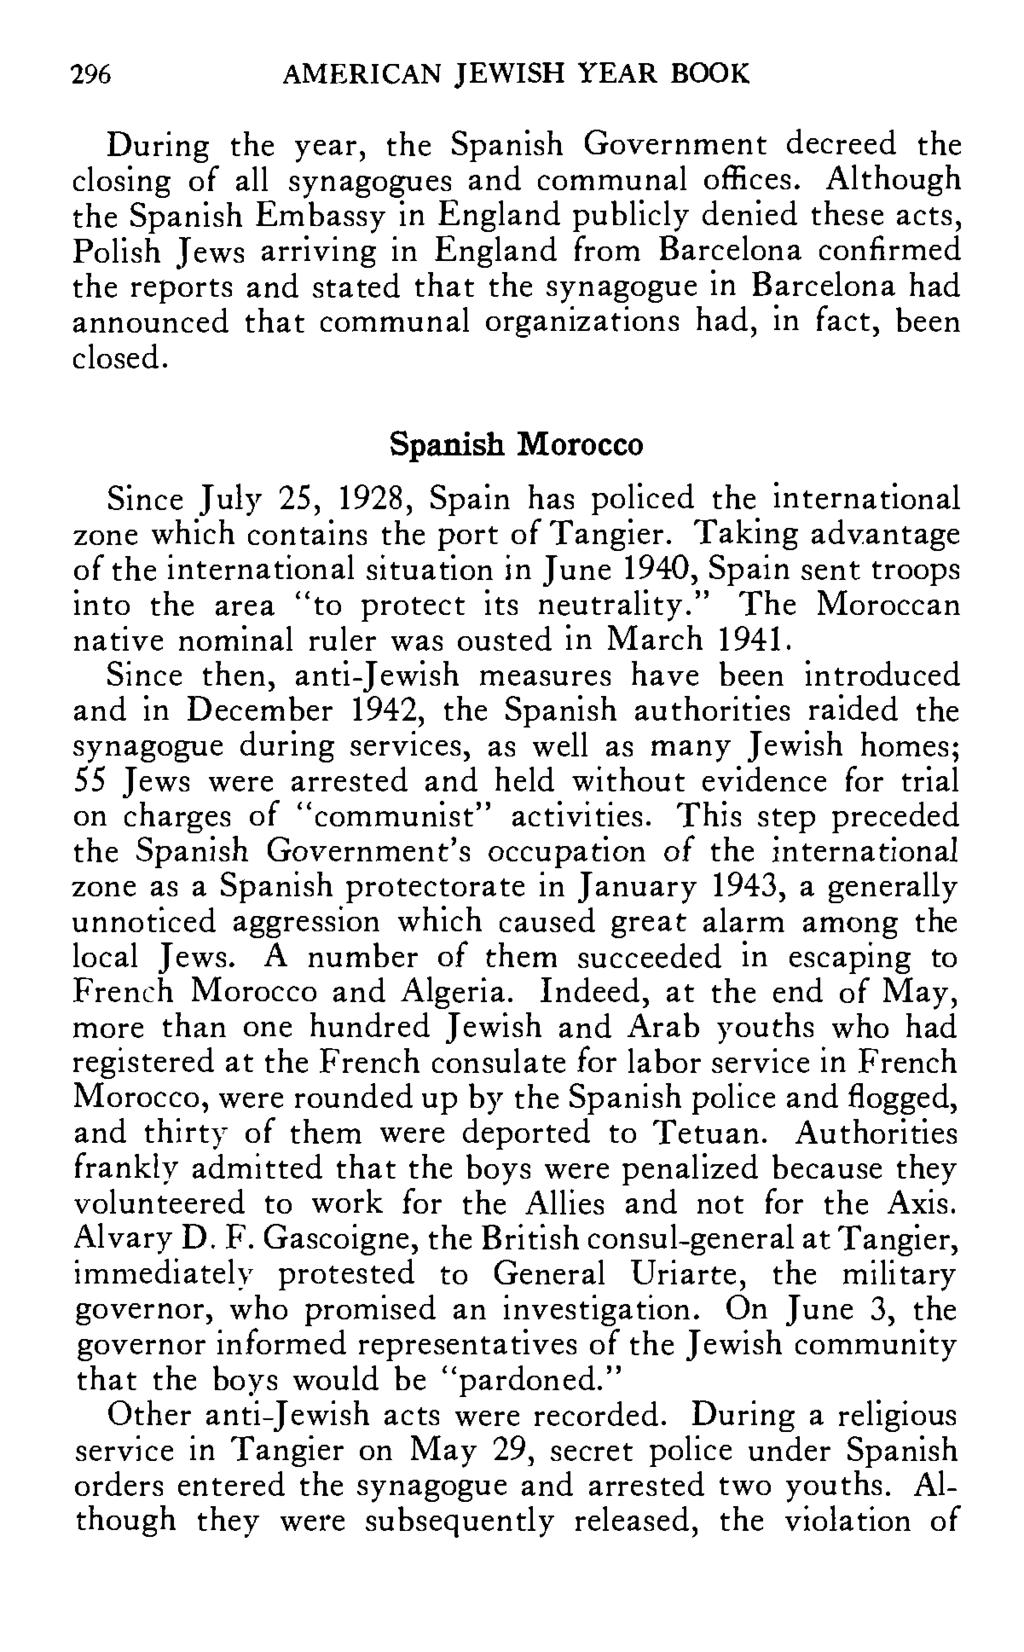 296 AMERICAN JEWISH YEAR BOOK During the year, the Spanish Government decreed the closing of all synagogues and communal offices.